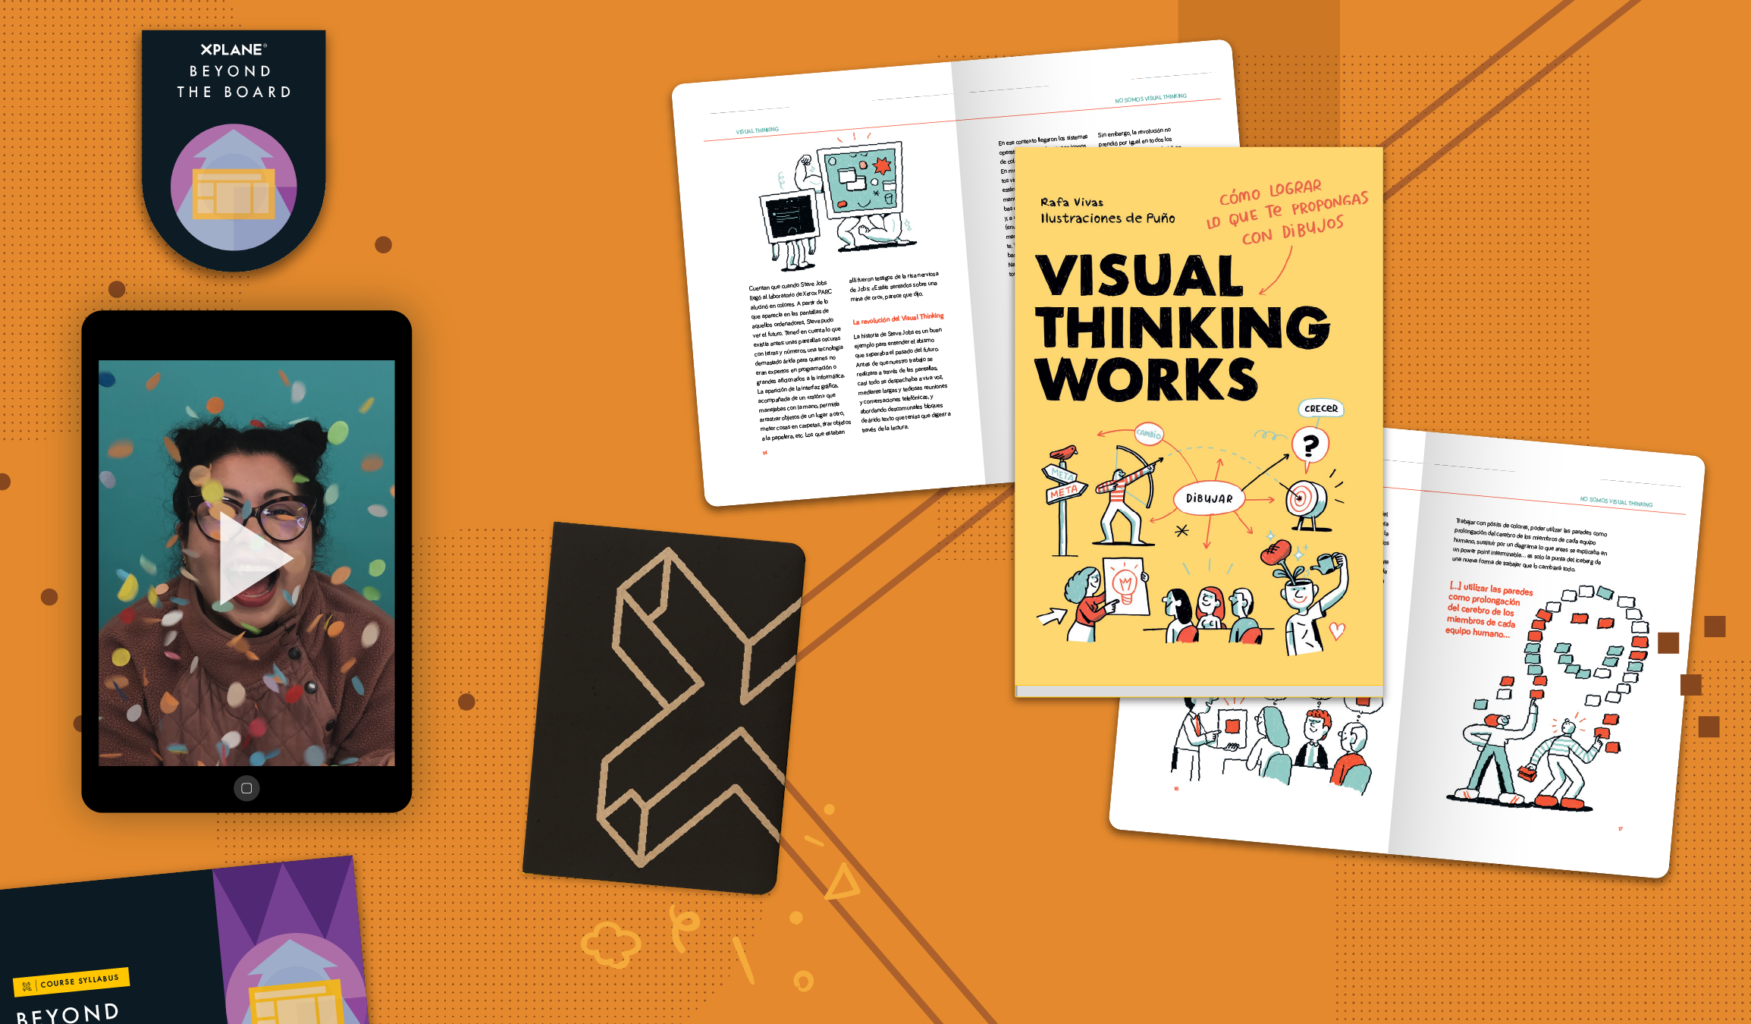 Array of Visual Thinking Works book, pocket notebook, and Beyond the Board course content against an orange background.